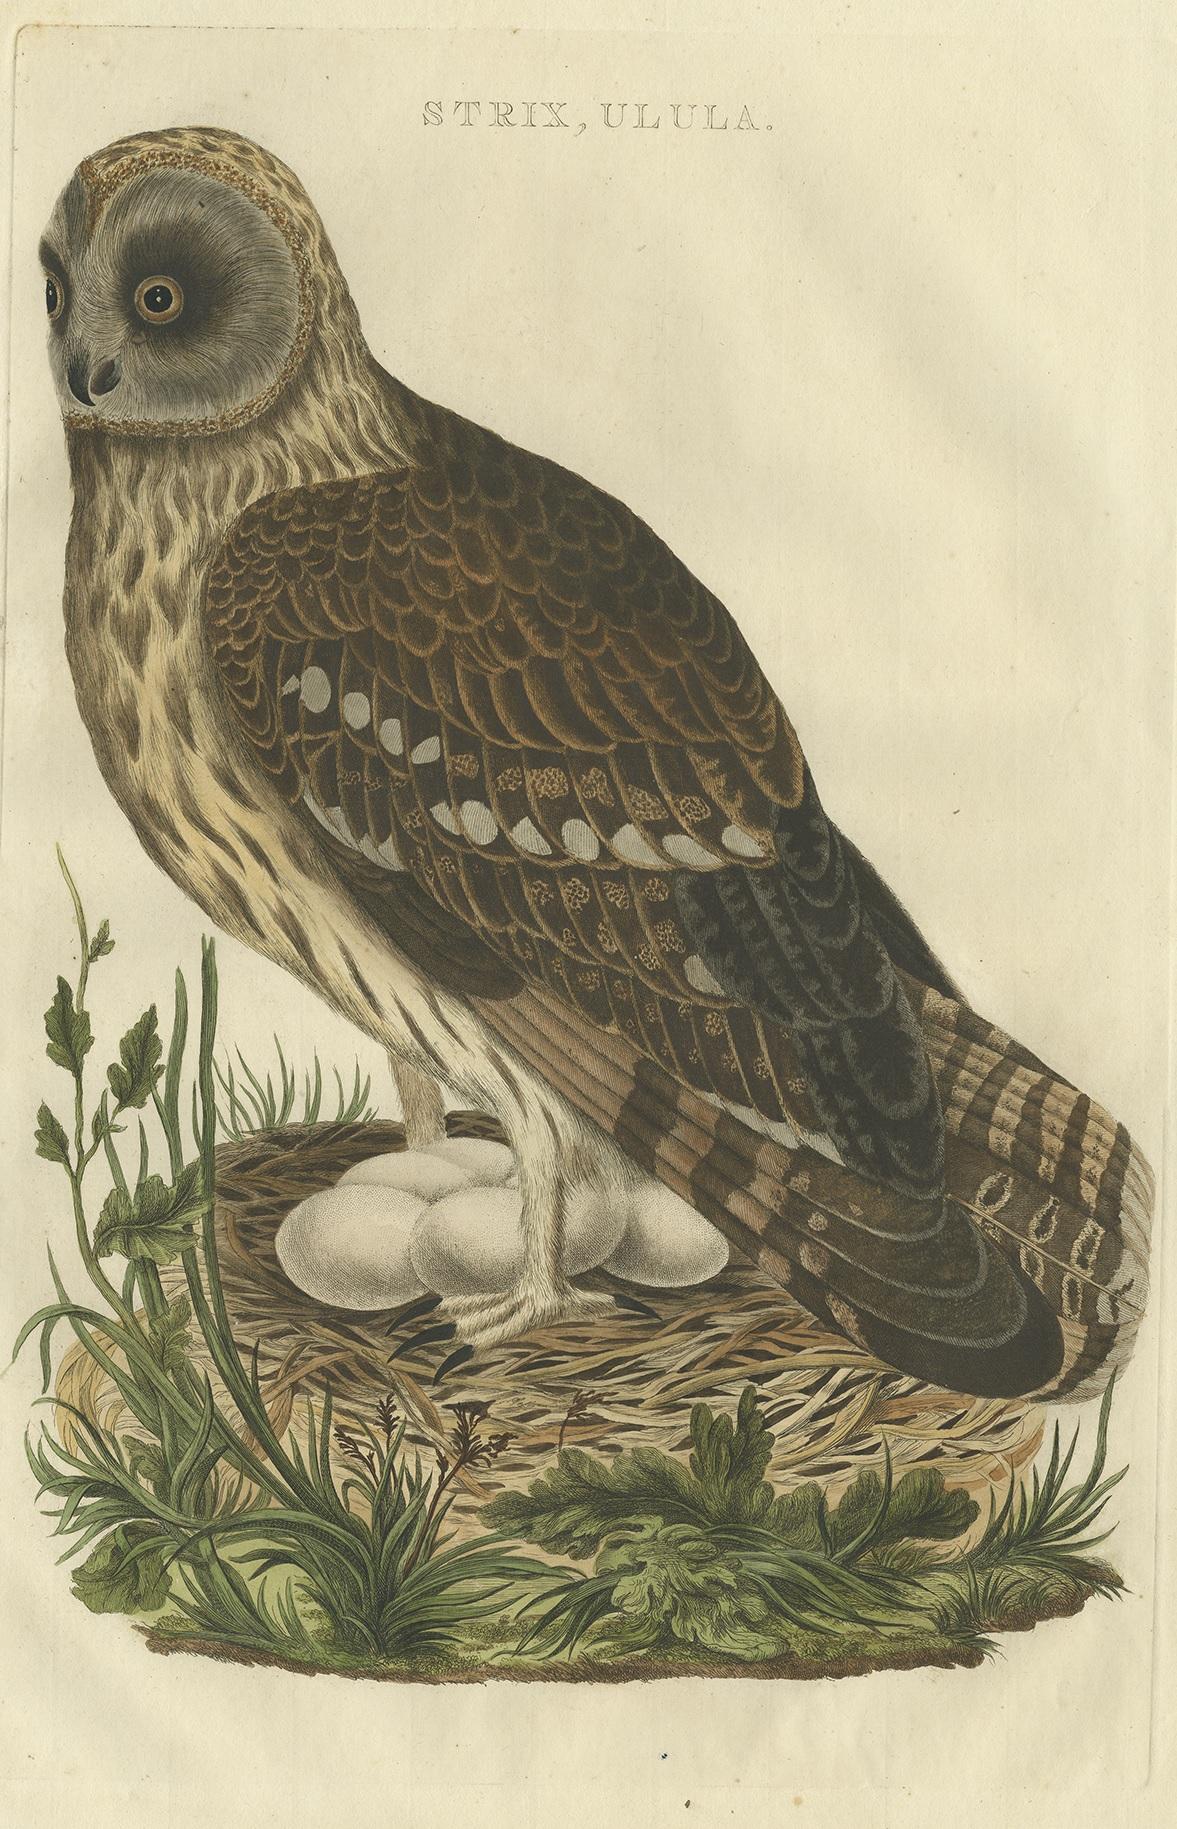 Antique print titled 'Strix, Ulula'. Strix is a genus of owls in the typical owl family (Strigidae), one of the two generally accepted living families of owls, with the other being the barn-owl (Tytonidae). Common names are earless owls or wood